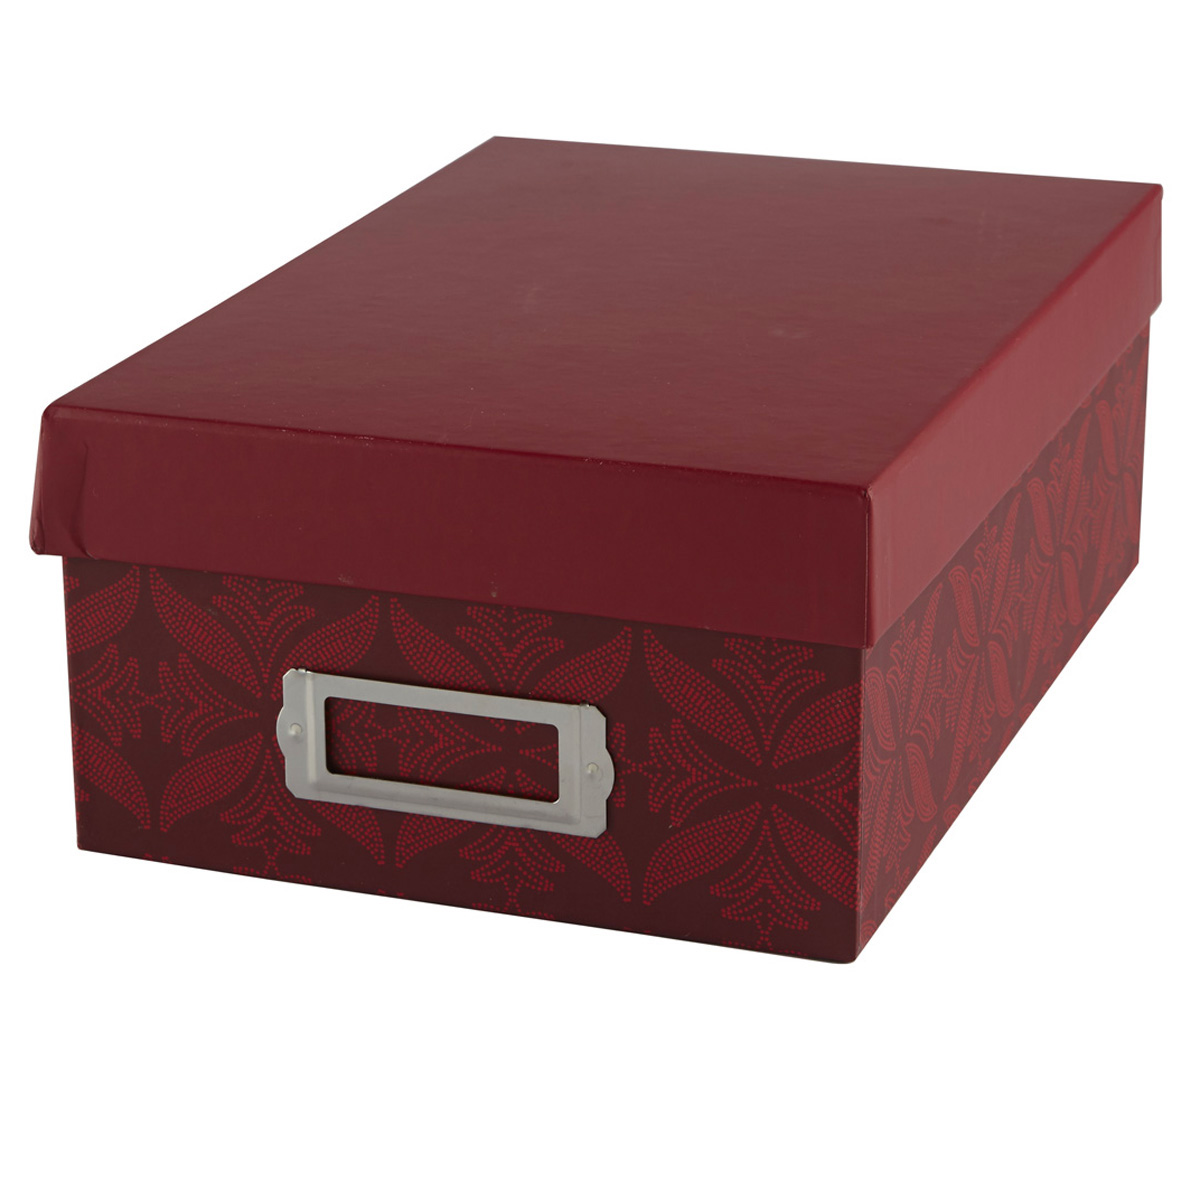 Buy the Decorative Photo Box by Recollections© at Michaels